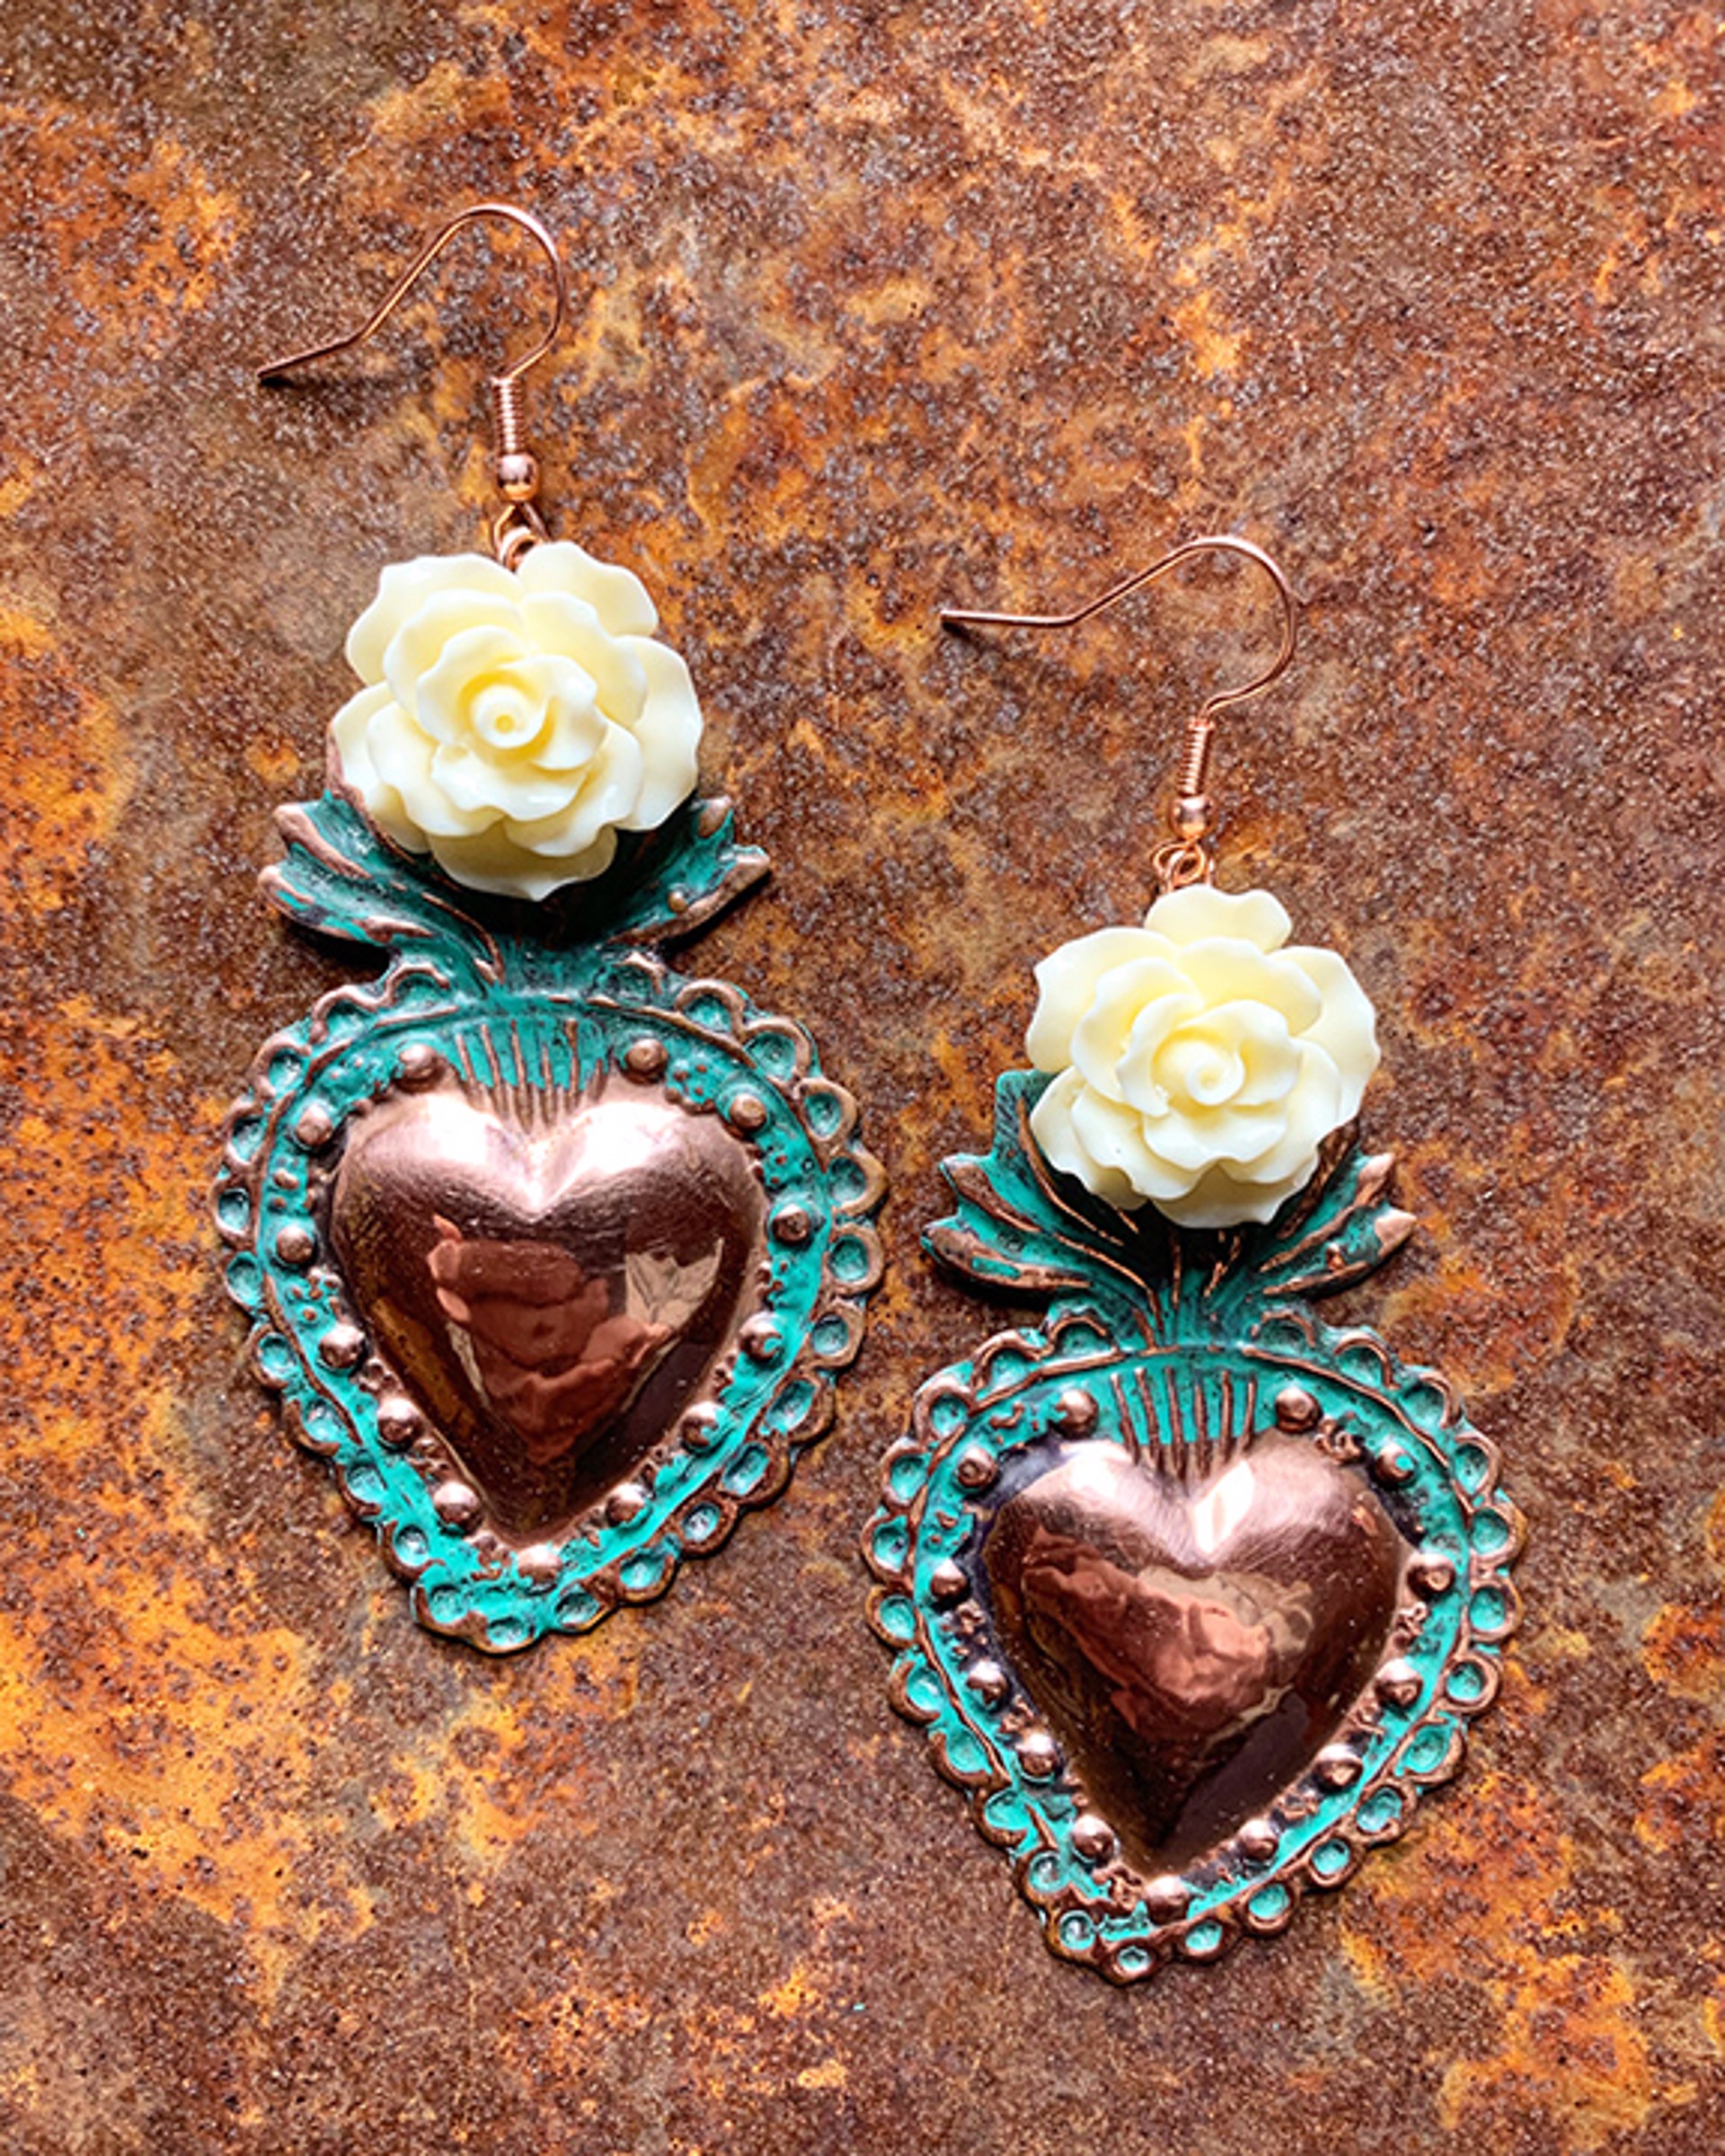 K723 Sacred Heart Earrings with White Roses by Kelly Ormsby